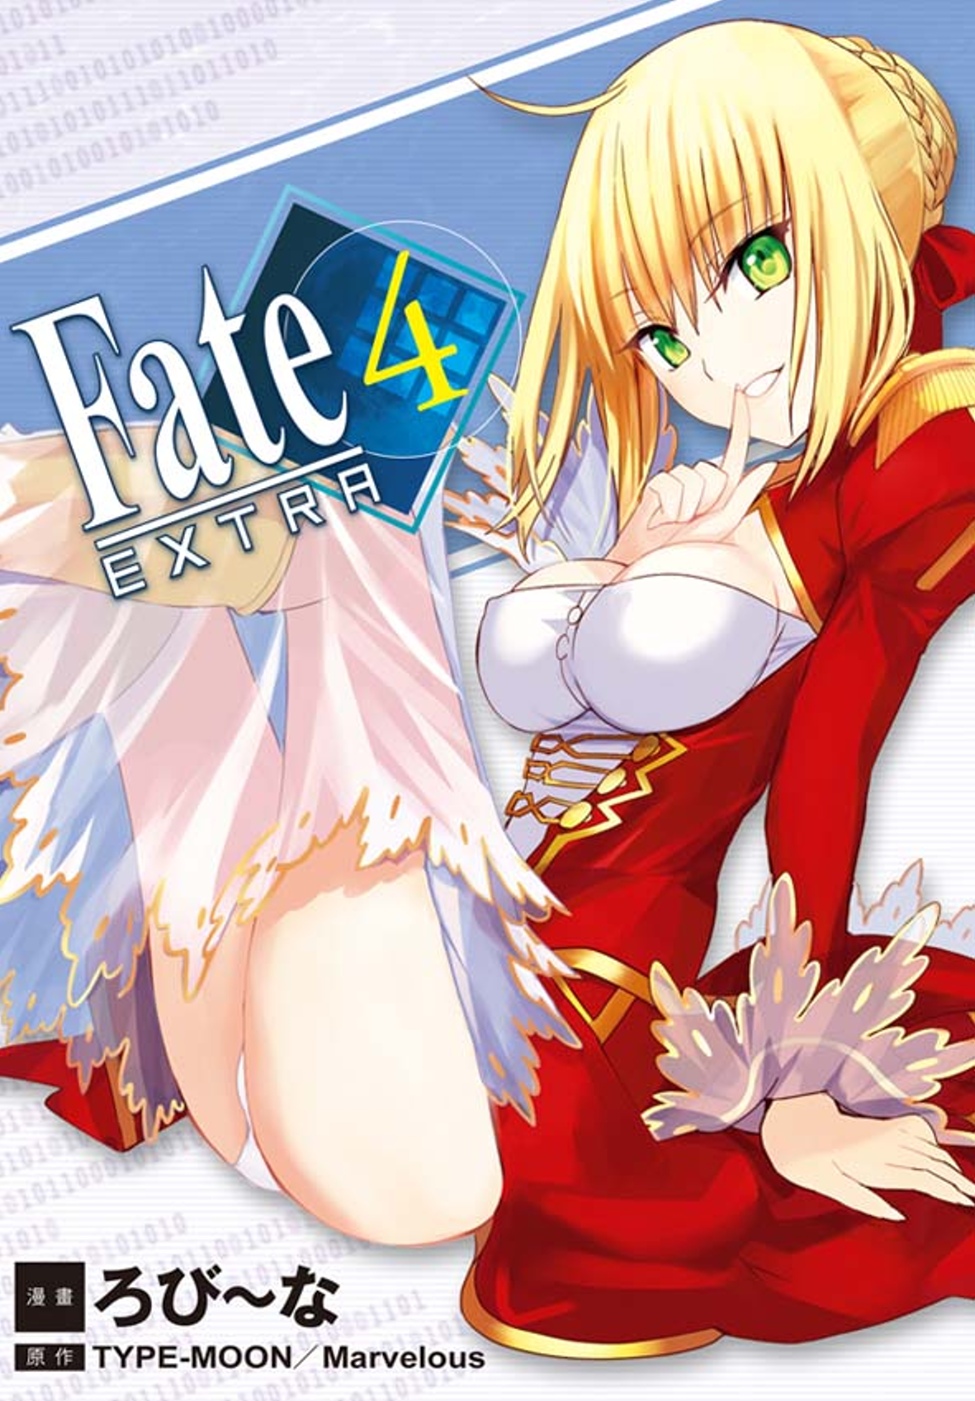 Fate / EXTRA 4